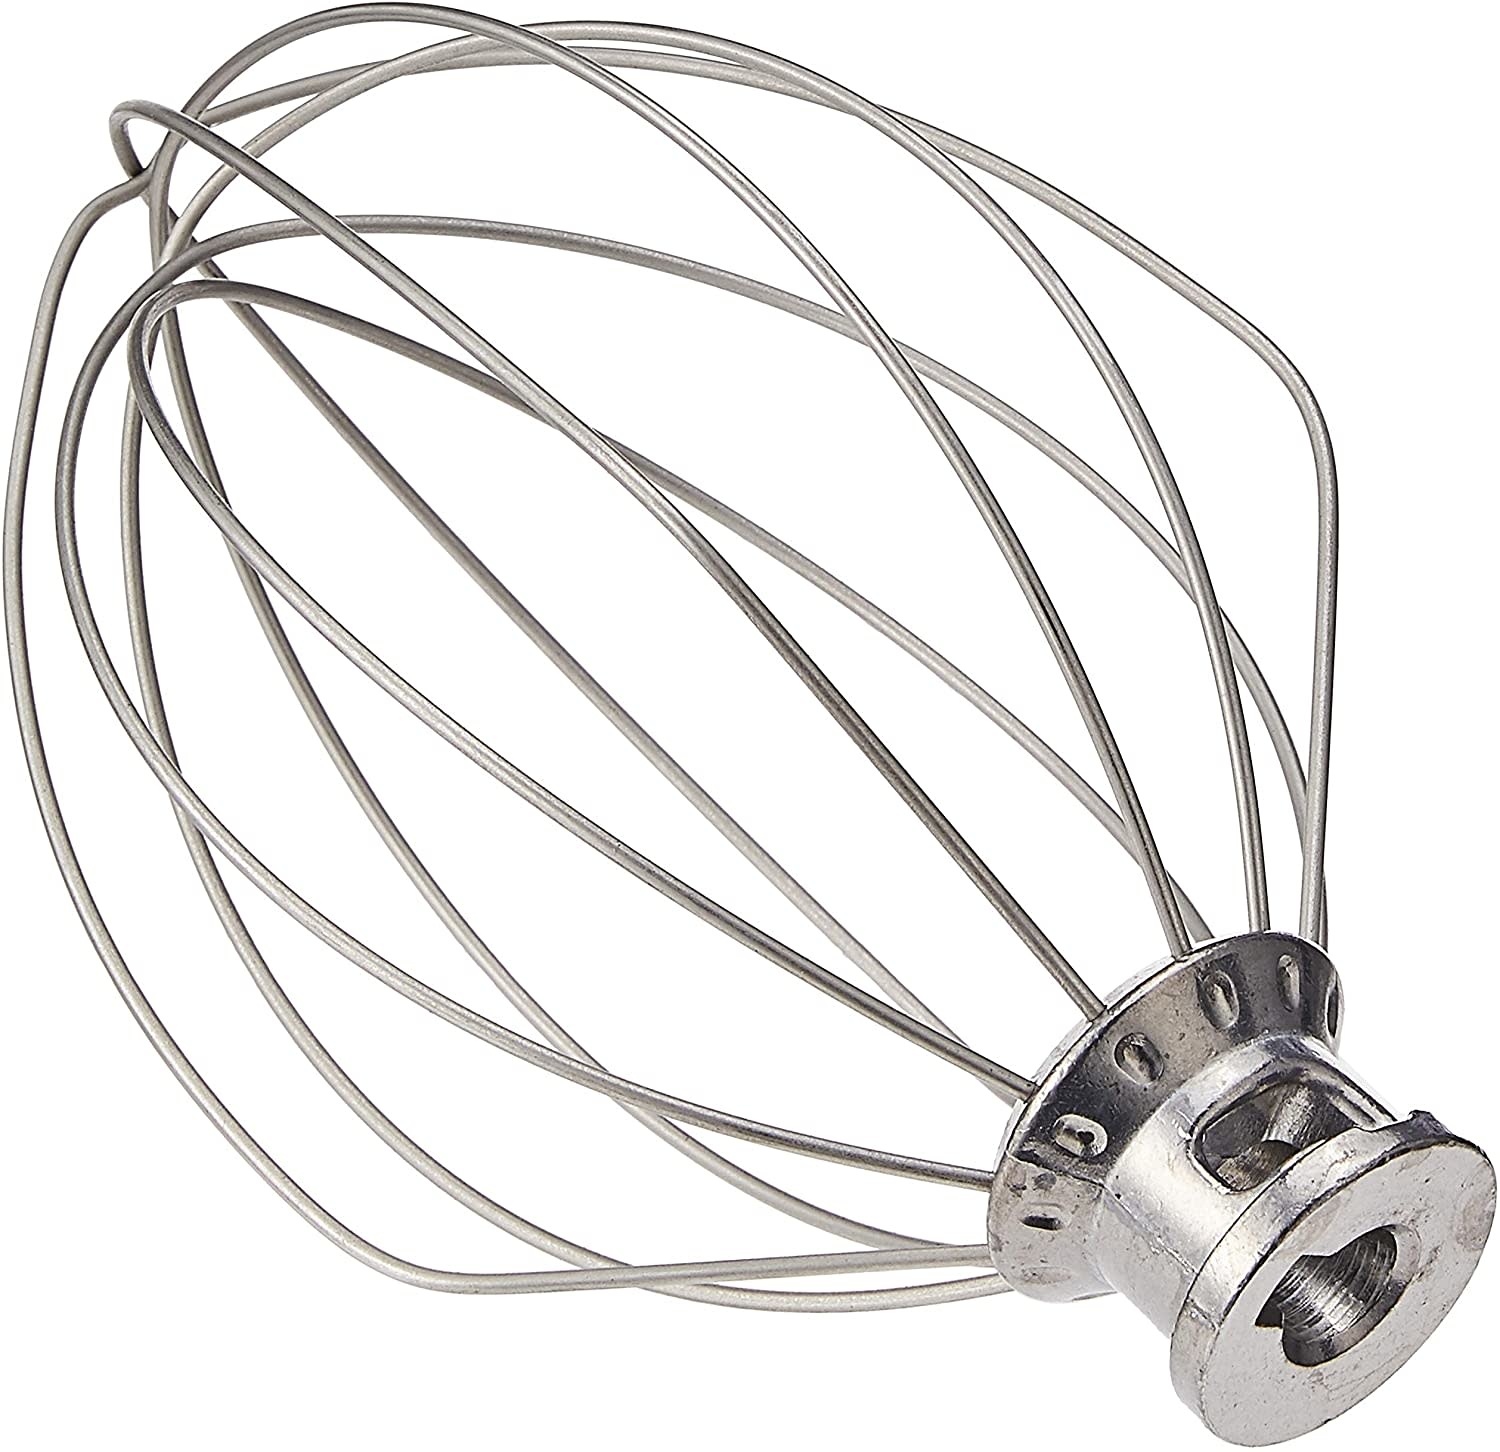 Kitchenaid Replacement Wire Whip For 5 Quart Lift Machines 